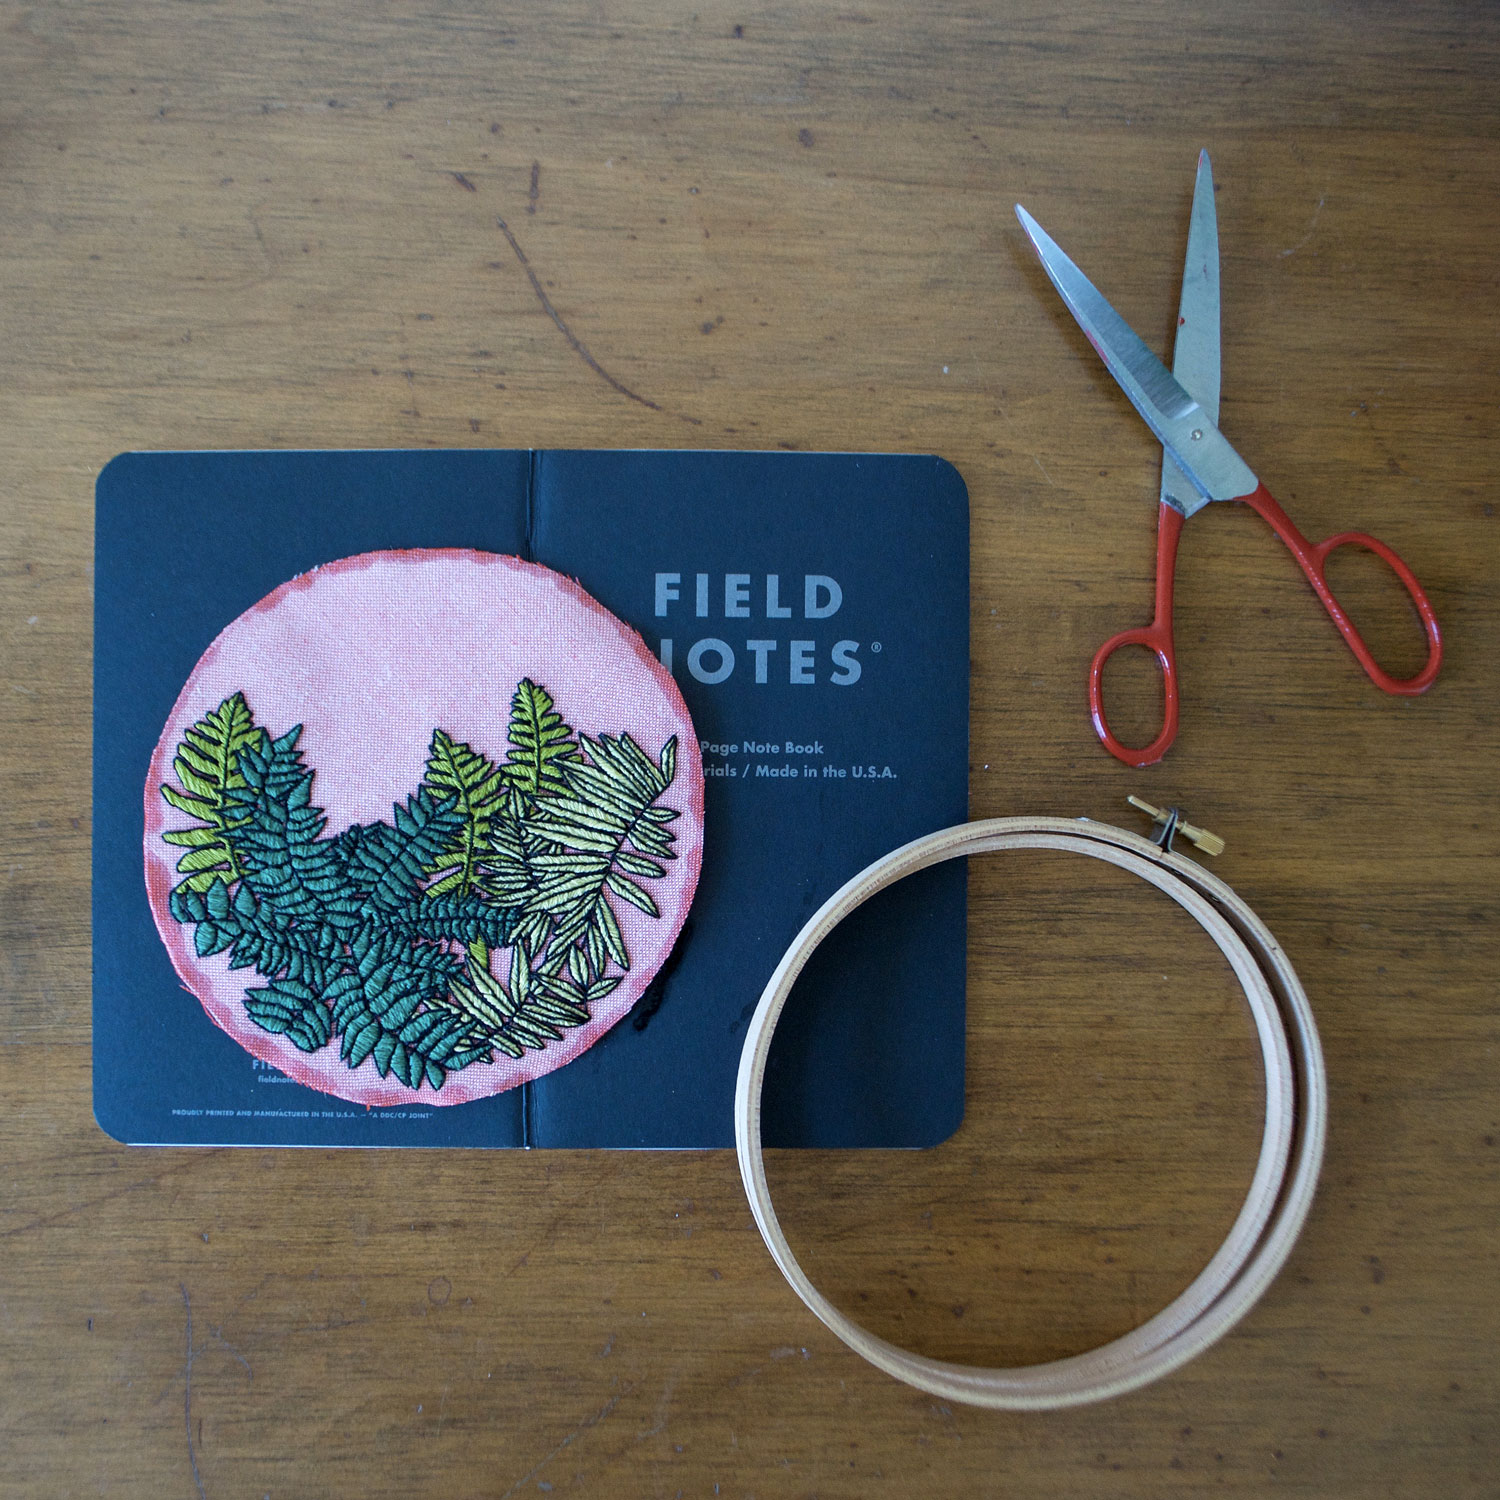 DIY Embroidered Patch Workshop – Assembly: gather + create